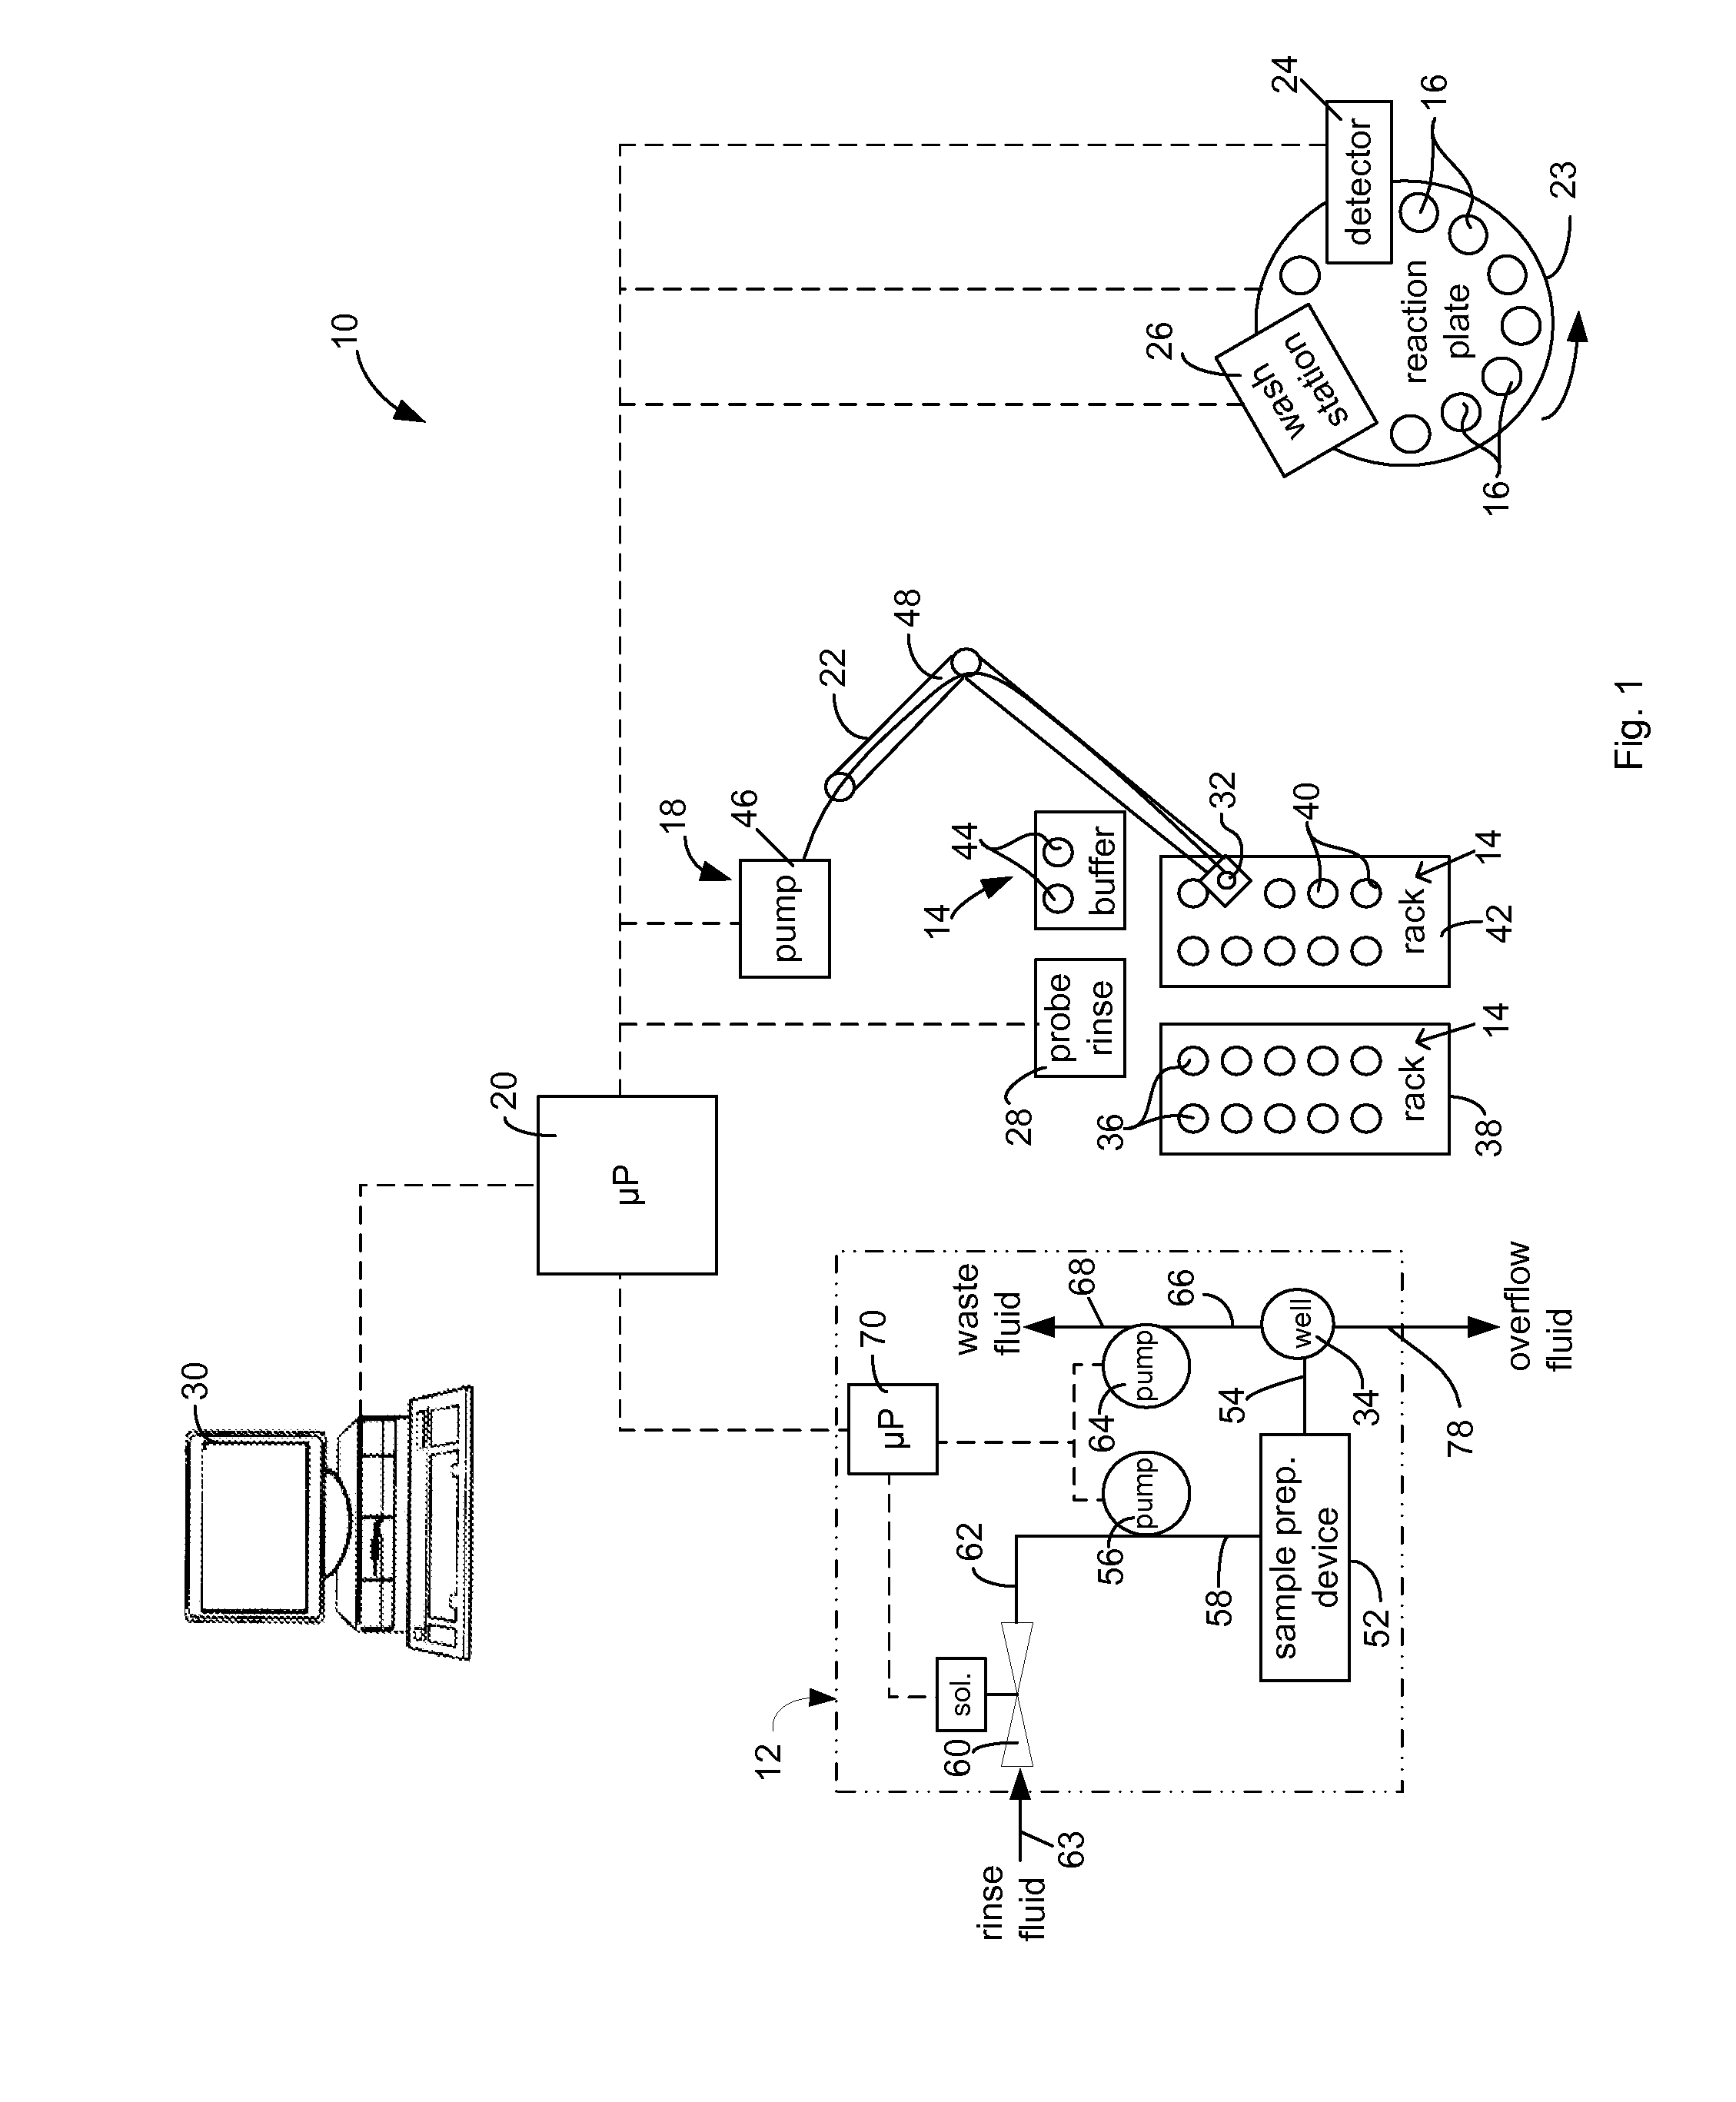 Method and apparatus for sample preparation in an automated discrete fluid sample analyzer